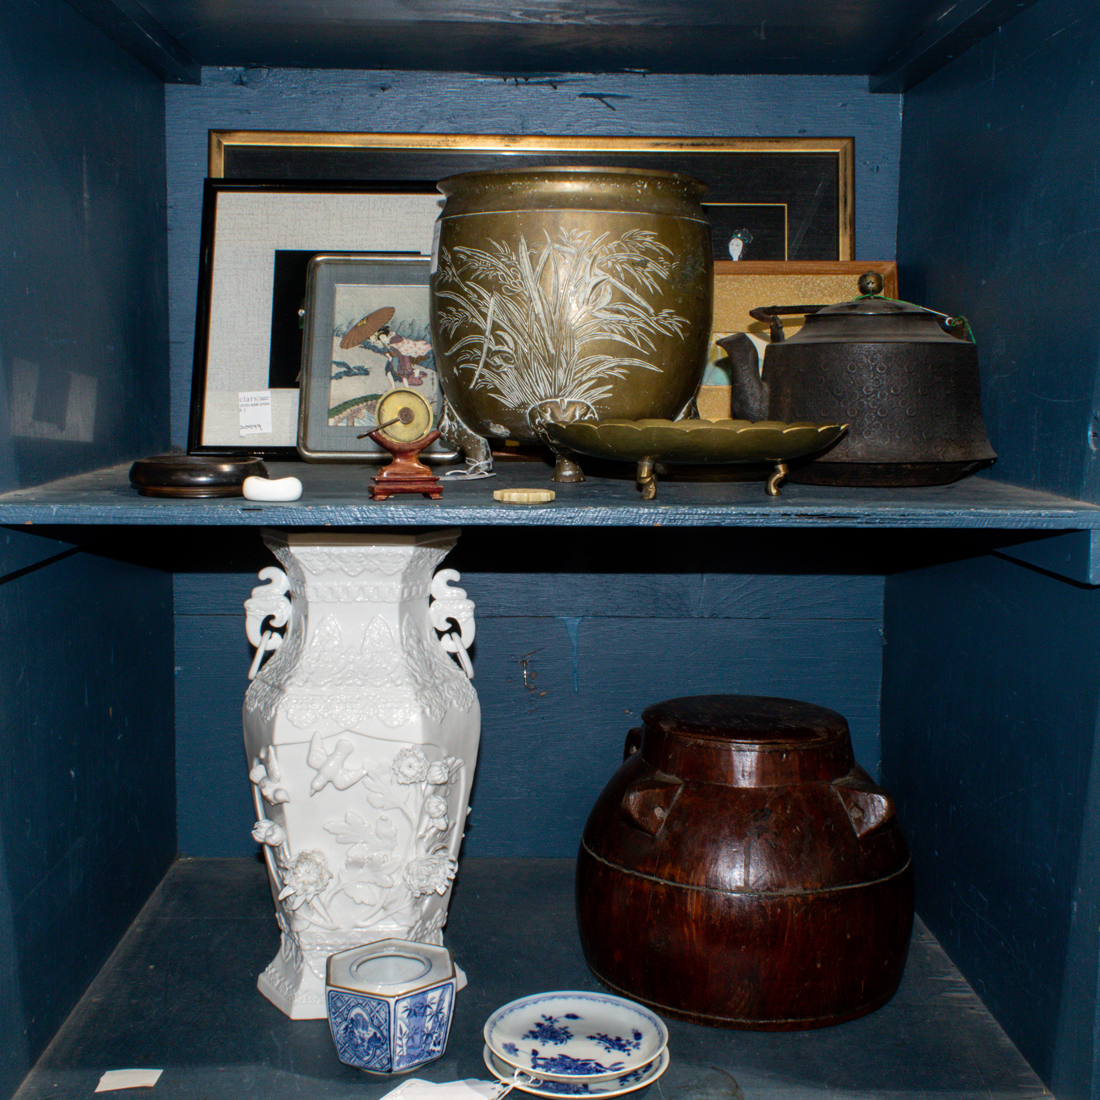 TWO SHELVES OF MAINLY ASIAN DECORATIVE